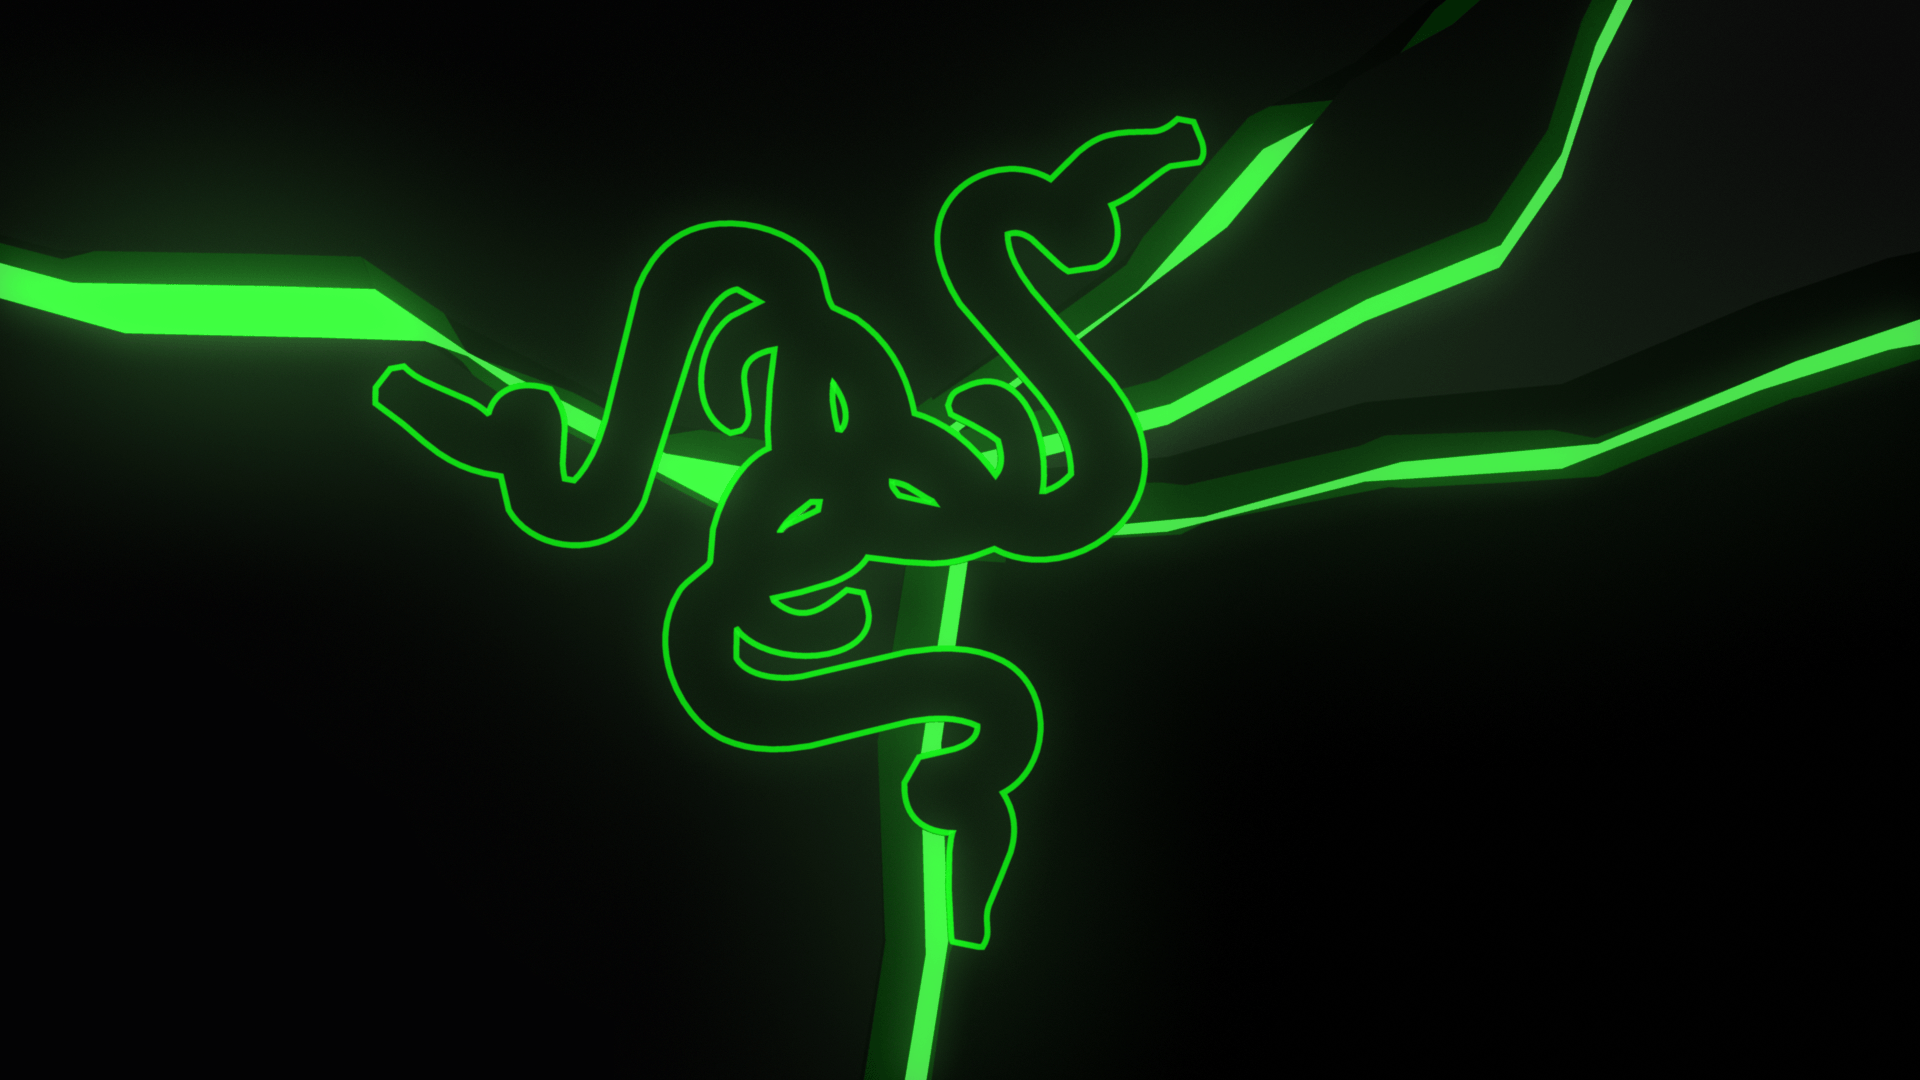 Twitter 上的R Λ Z Ξ RRep our sustainability champion Sneki Snek with  these wallpapers designed by Dopatwo Find the perfect Razer wallpaper for  your setup today httpstcoIZ02f9P48D httpstcoVhGRMIlhK2  Twitter